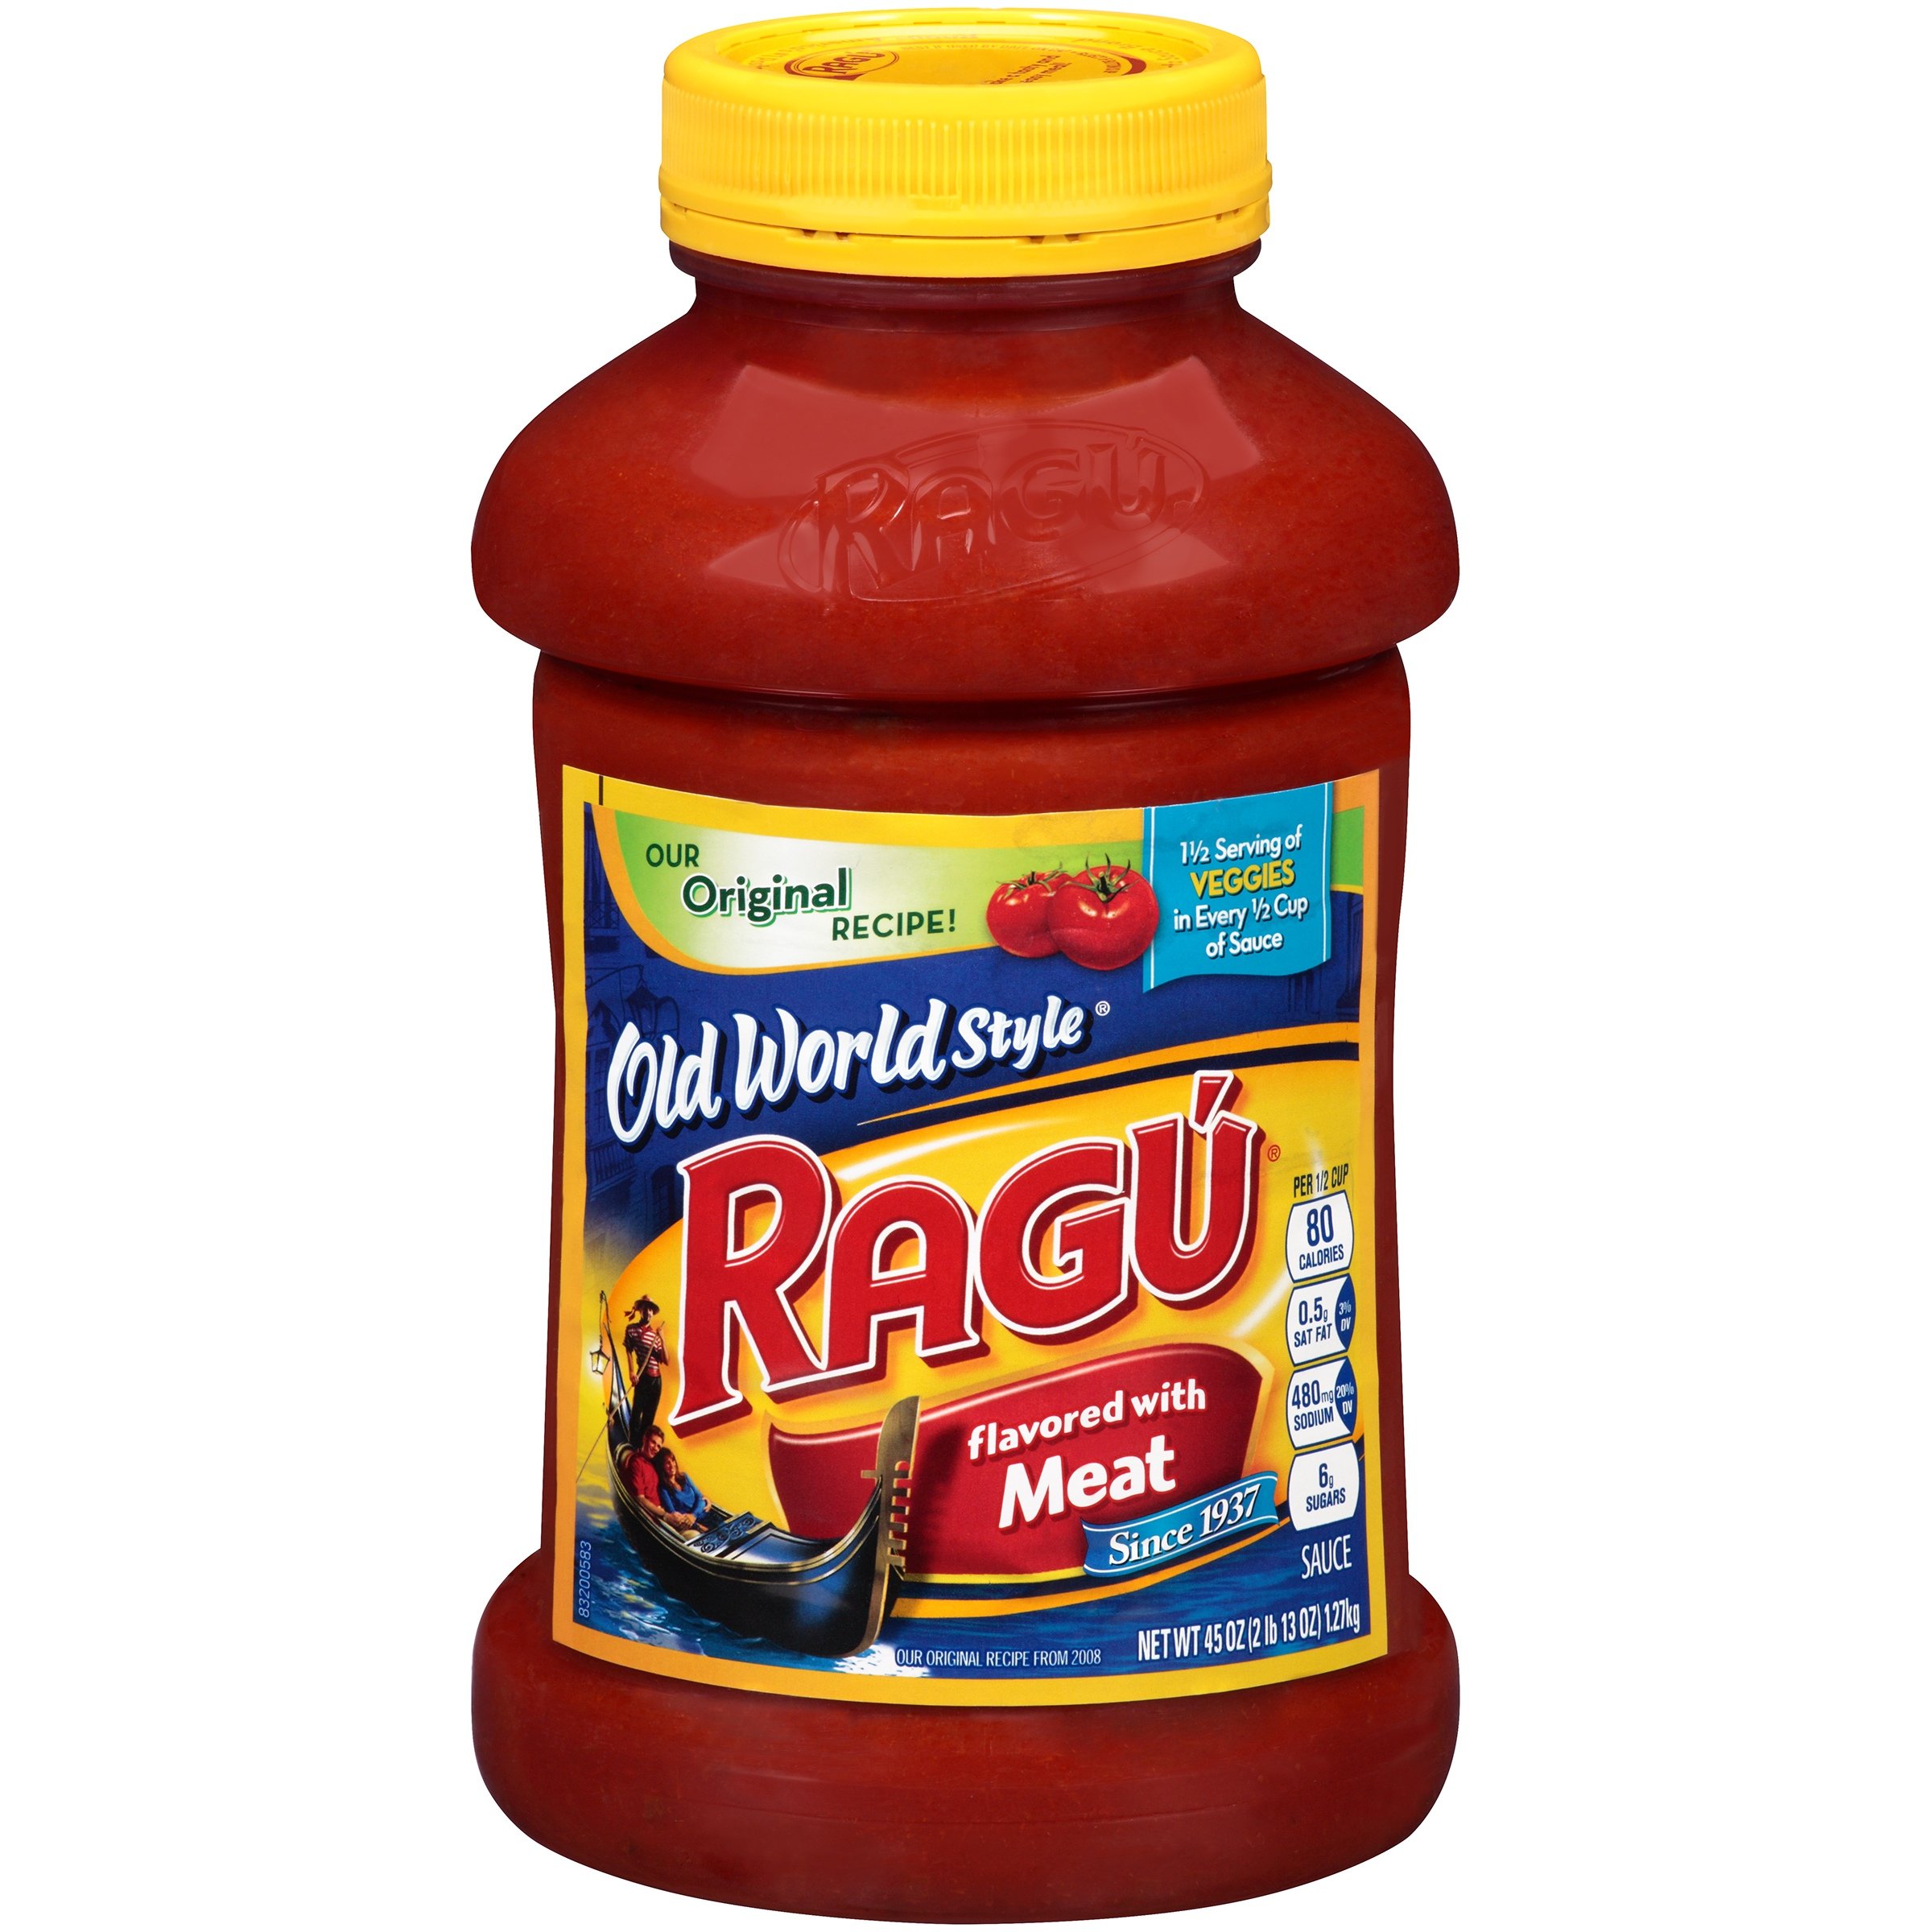 Ragu Old World Style Traditional Meat Pasta Sauce 45 oz.